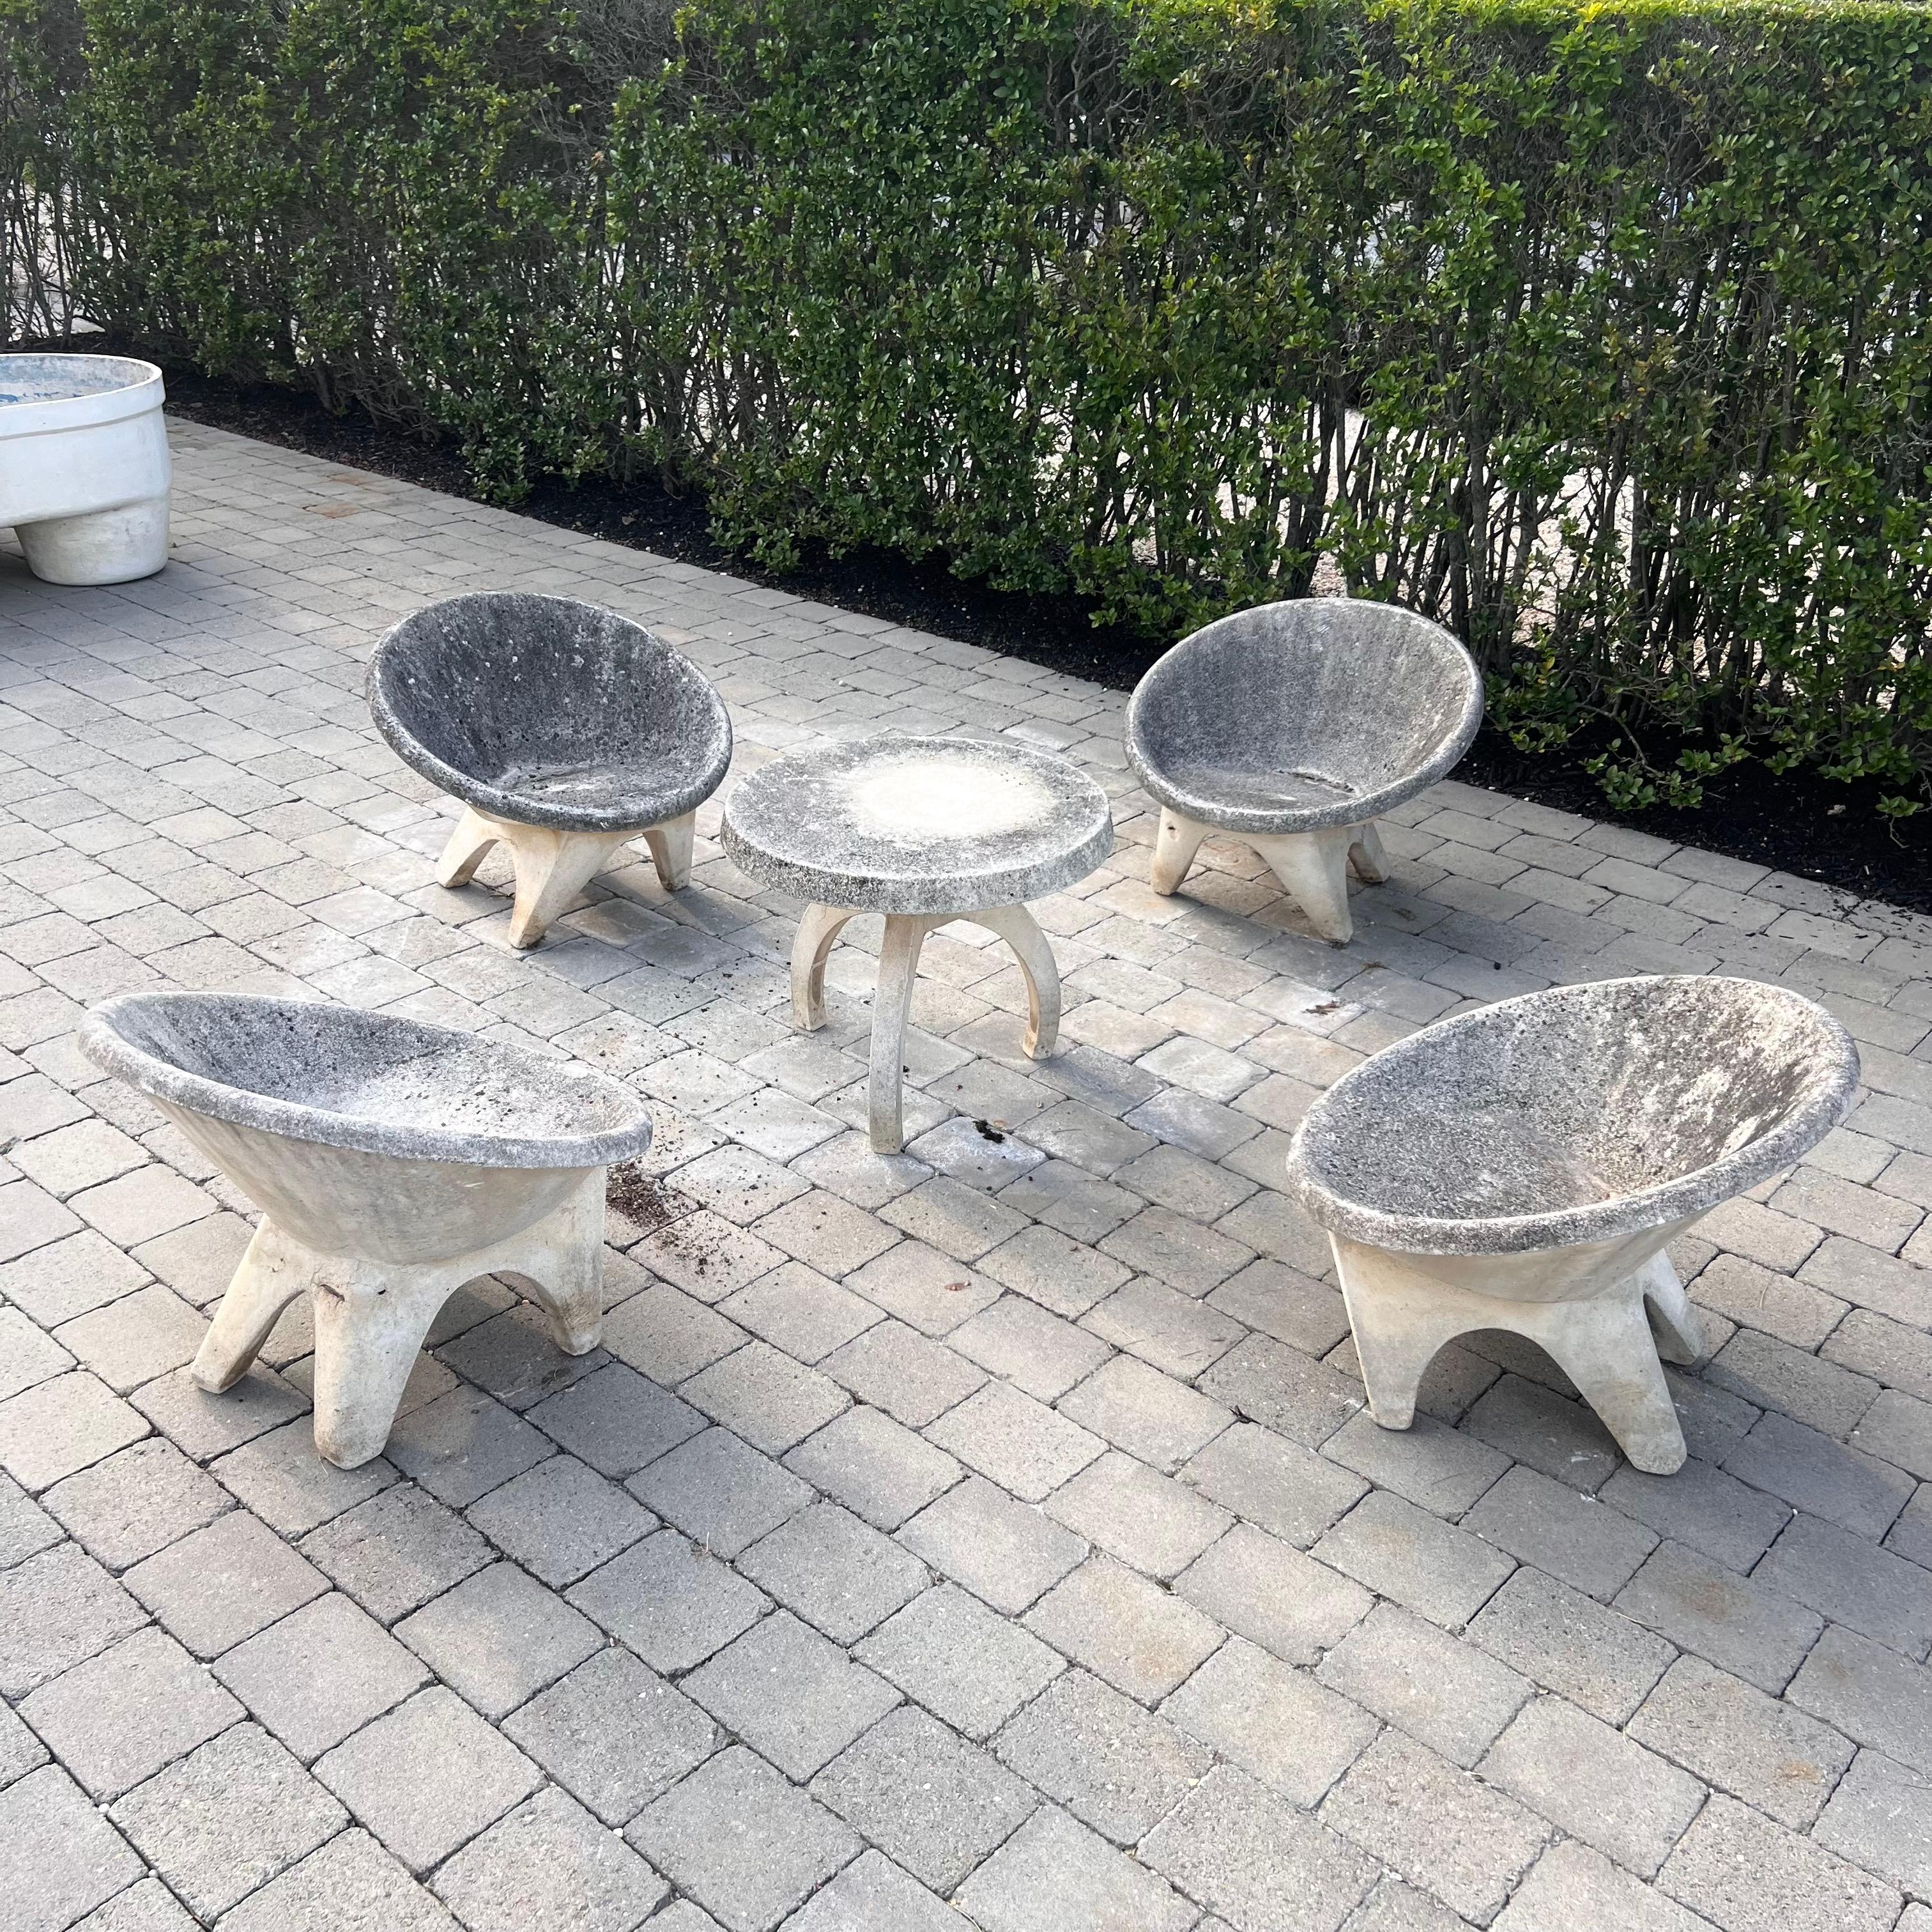 Set of 4 Sculptural Concrete Chairs and Table, 1960s Belgium For Sale 6